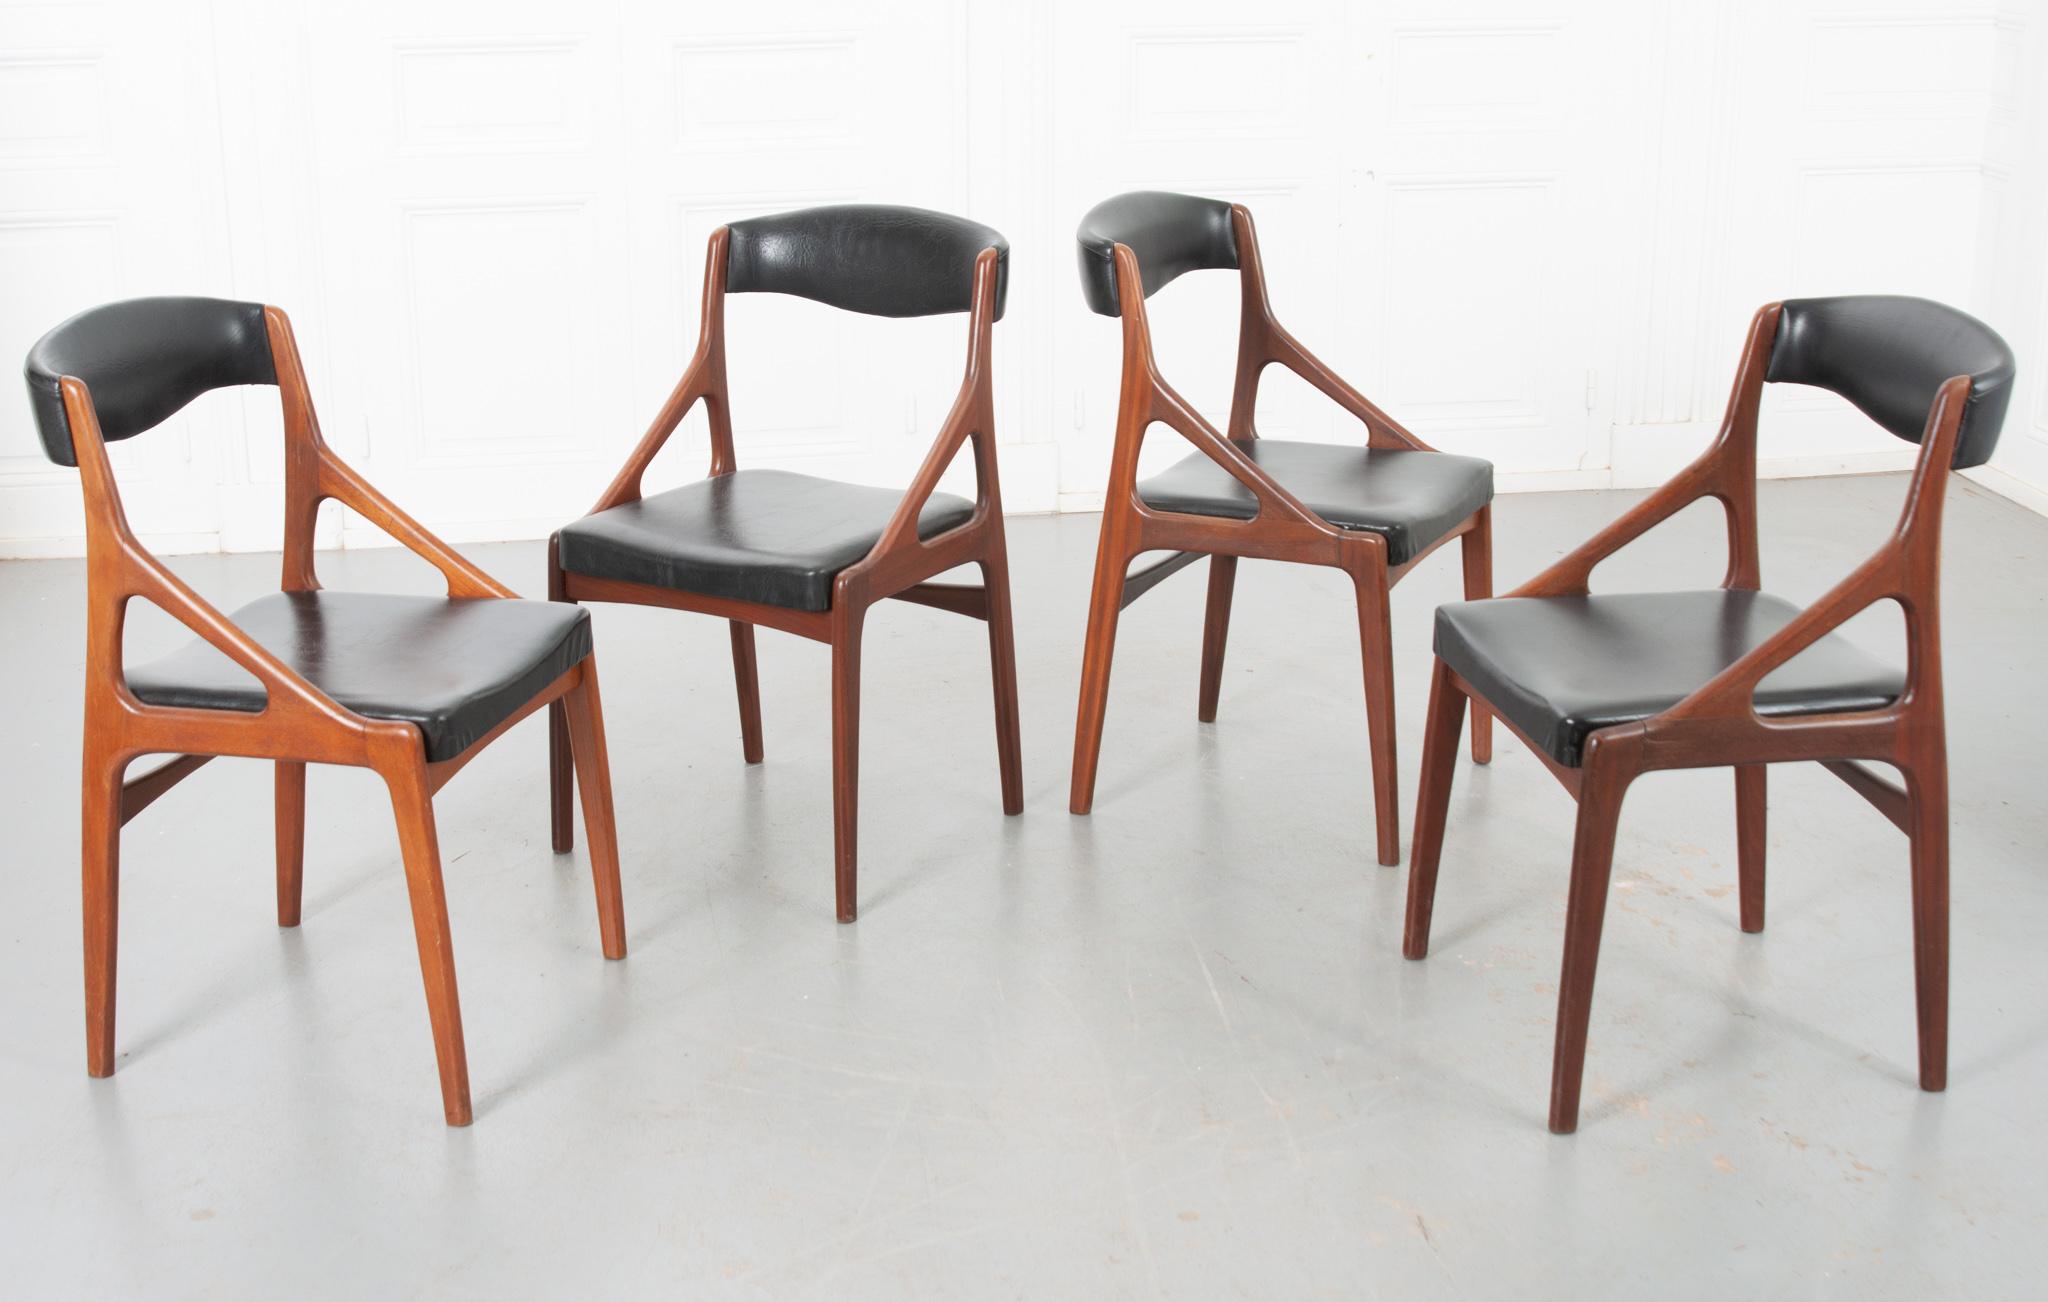 Sold as a set of four, these mid-century Danish dining chairs are sleek and easy to incorporate into your current decor. The smooth, light toned wood contrasts nicely with the black vinyl leather cushions. Seat height is 17-¼”. Make sure to view the